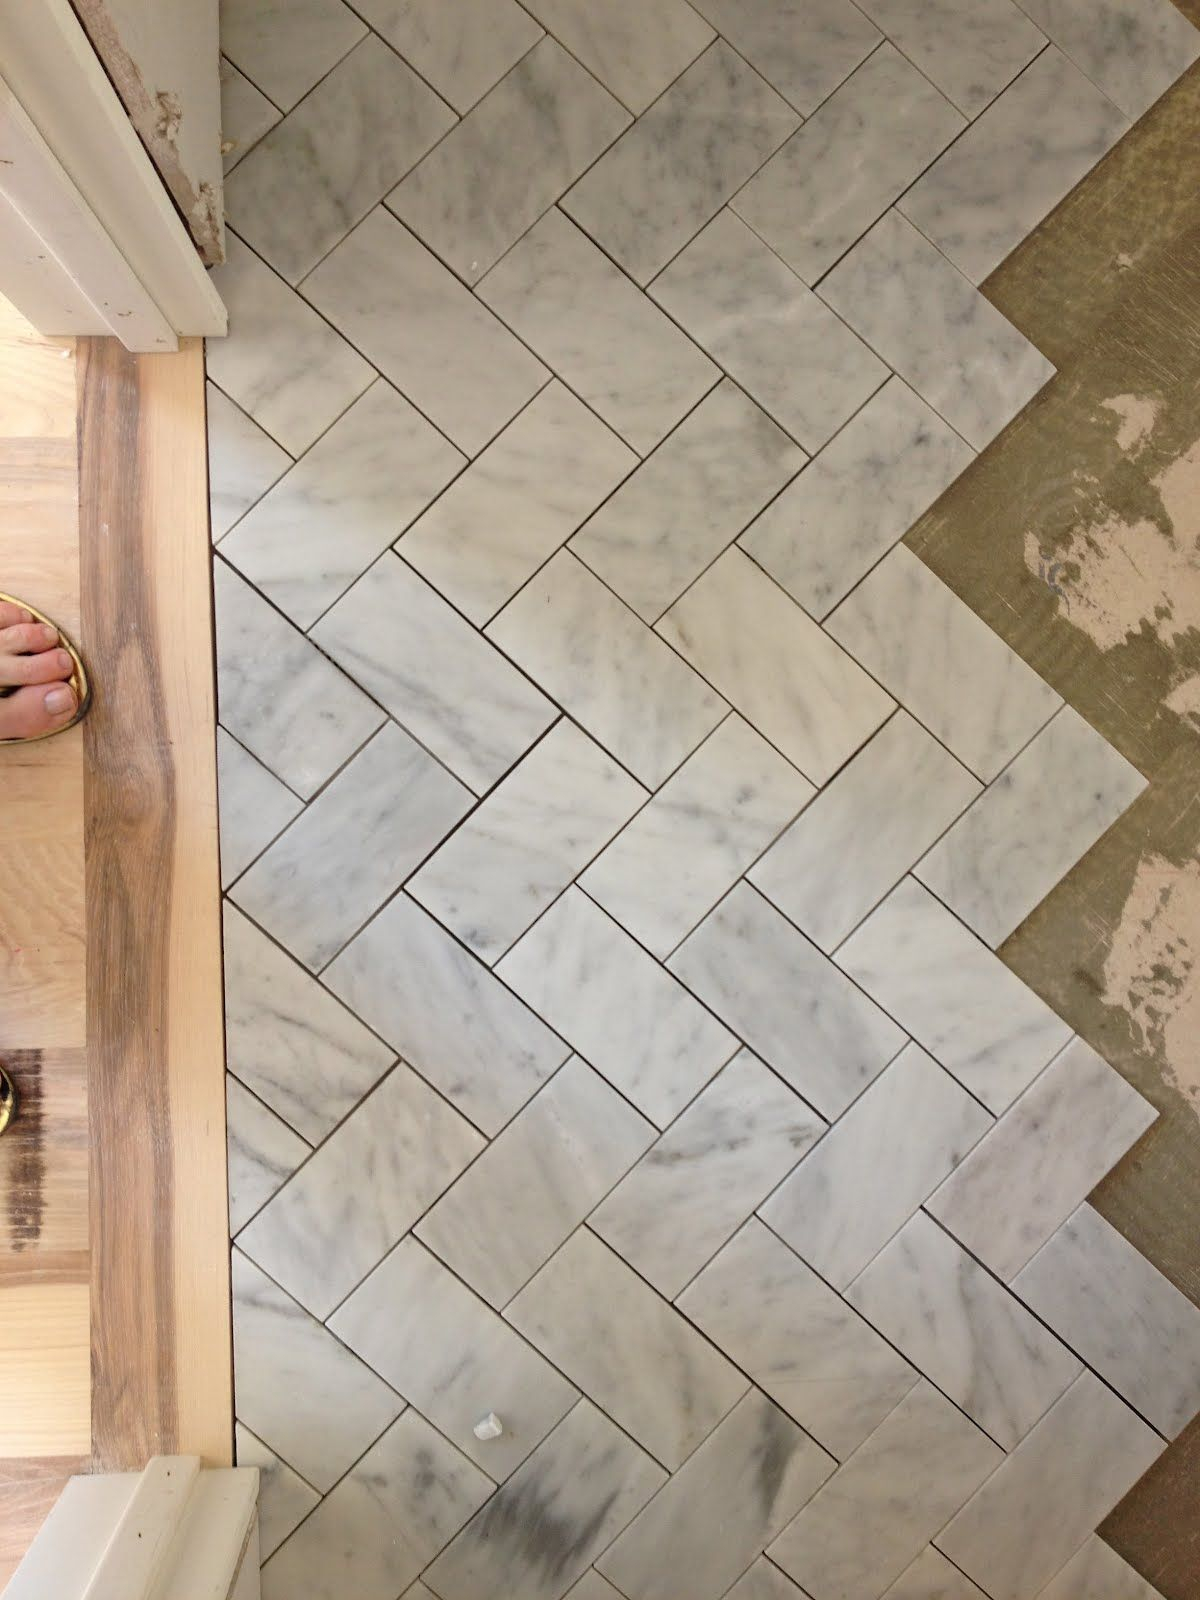 Herringbone Floor Subway Tile I Adore This New Home intended for proportions 1200 X 1600